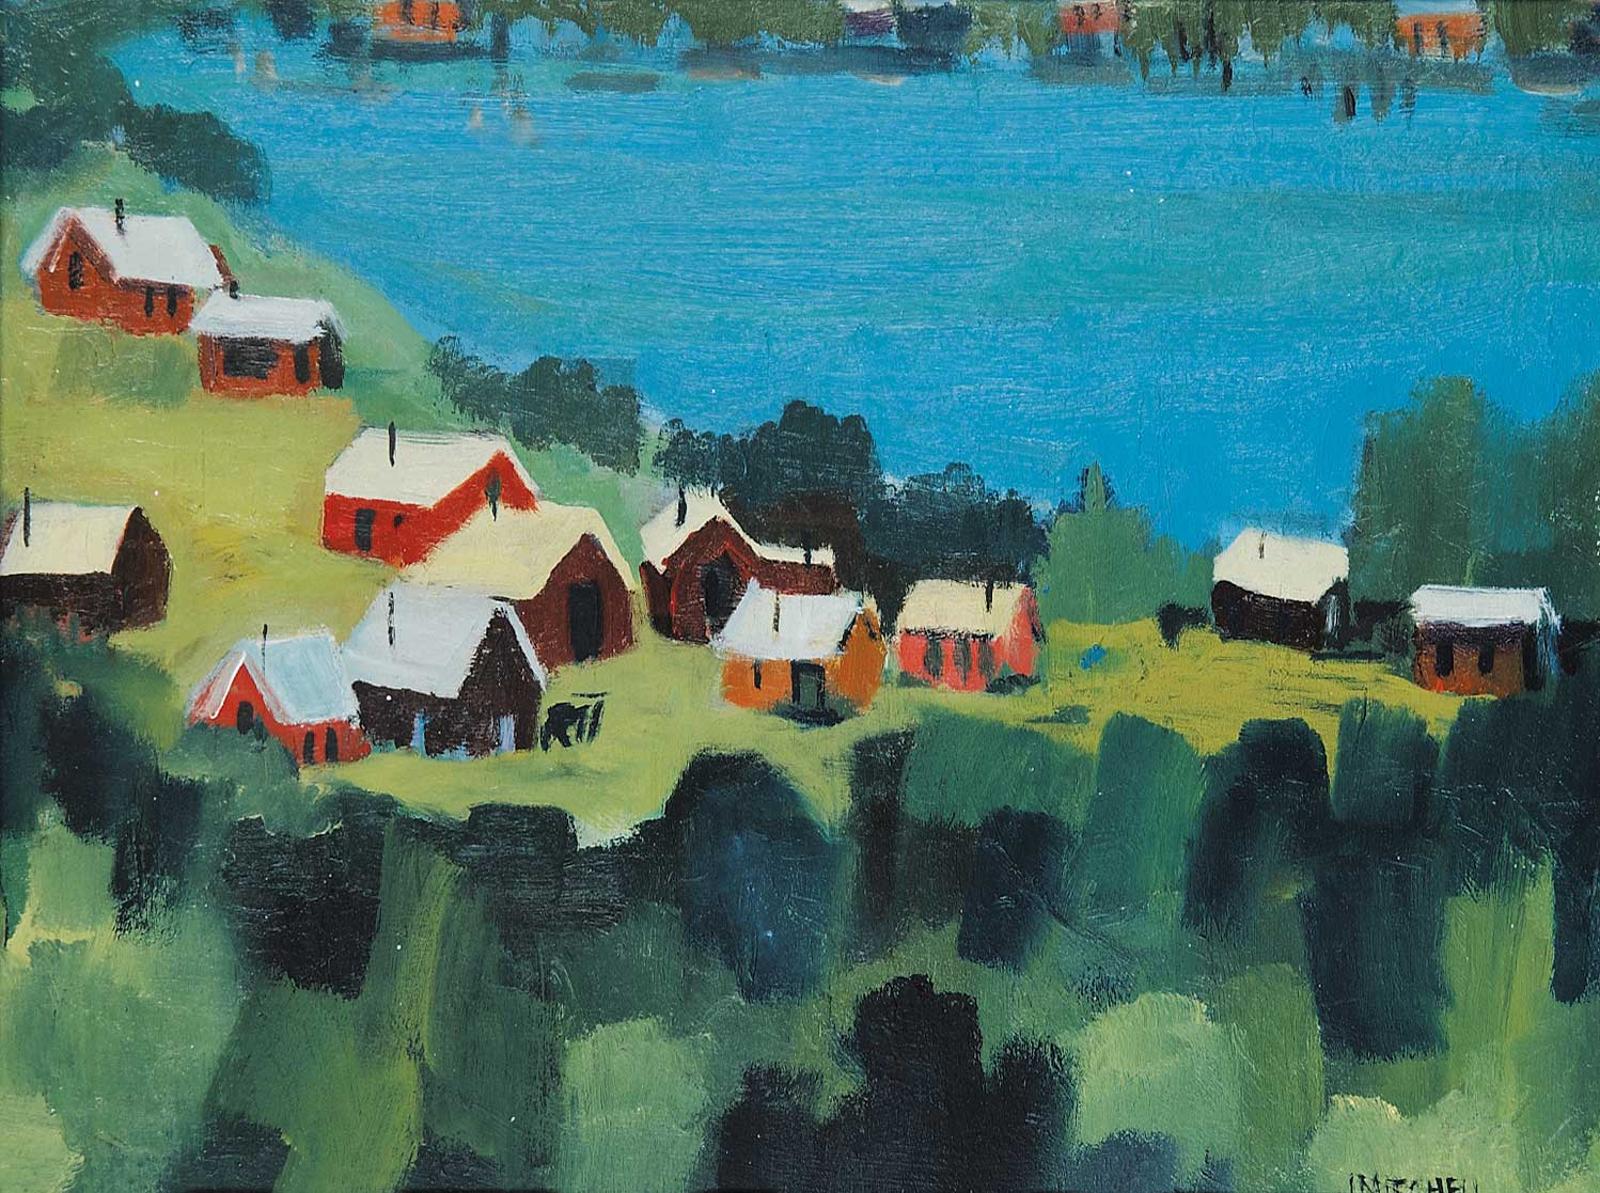 Janet Mitchell (1915-1998) - Untitled - Houses at the Lake